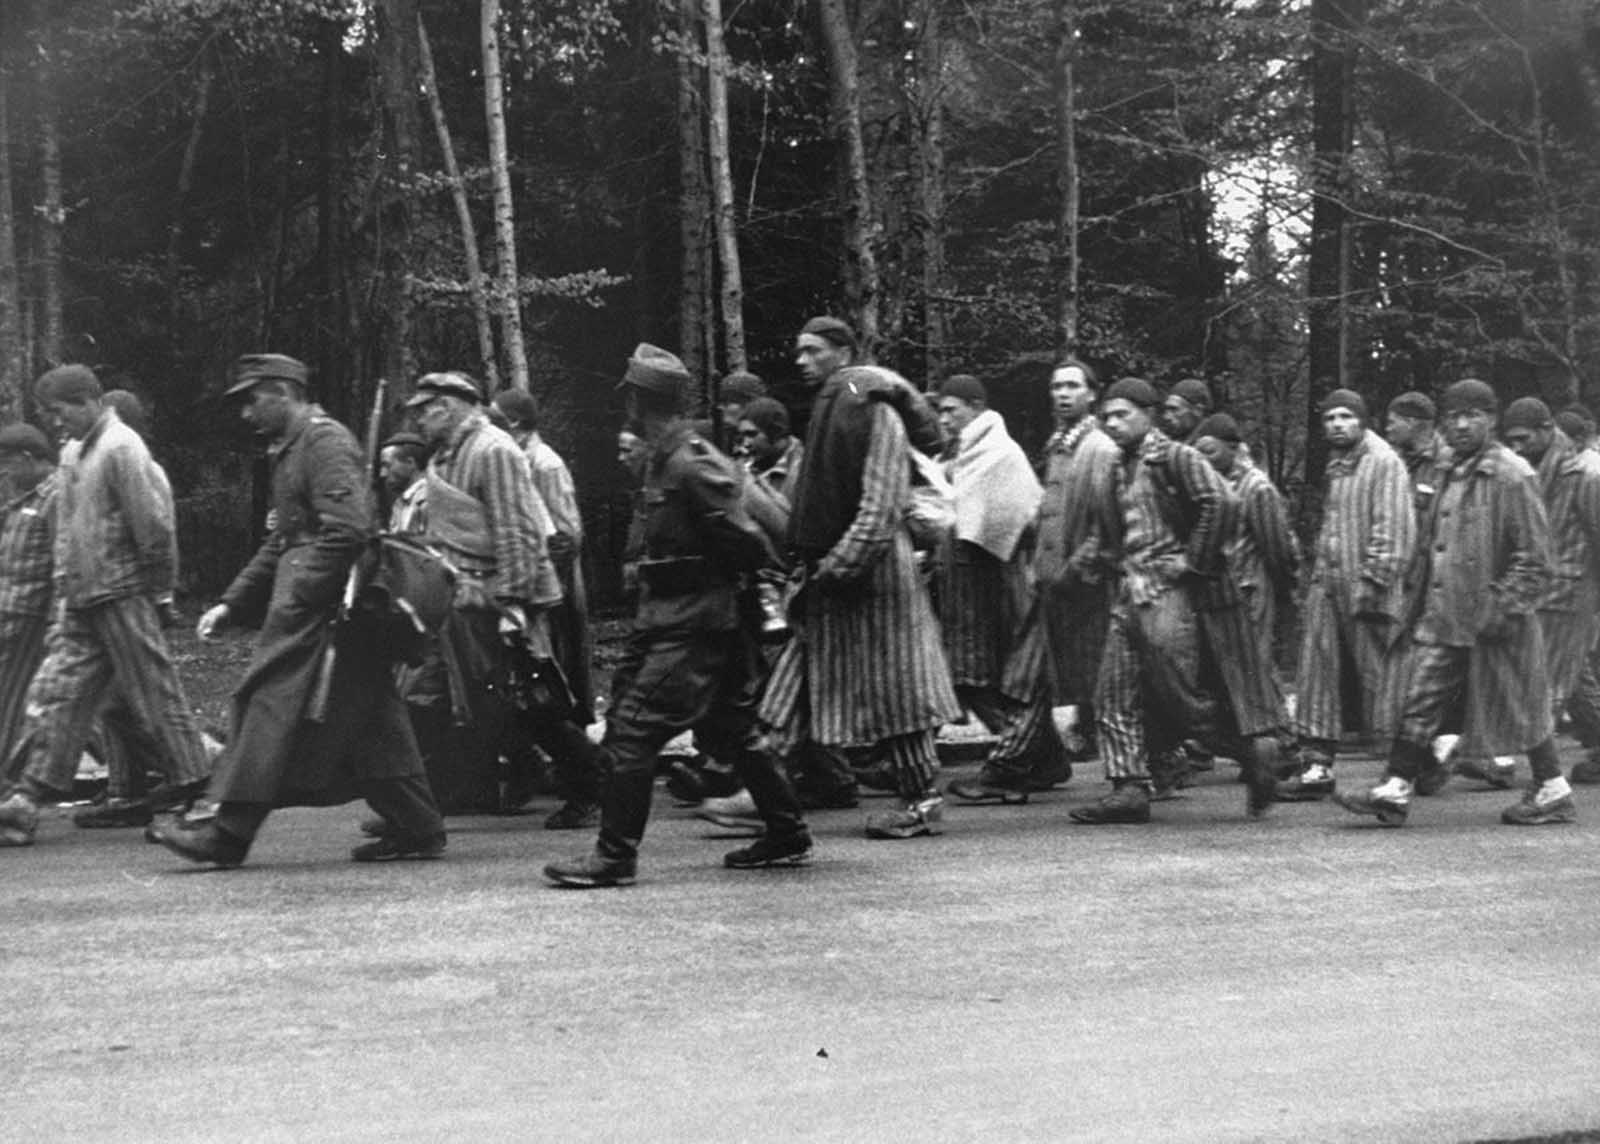 Prisoners on a death march from Dachau move towards the south along the Noerdliche Muenchner Street in Gruenwald, Germany, on April 29, 1945. Many thousands of prisoners were marched forcibly from outlying prison camps to camps deeper inside Germany as Allied forces closed in. Thousands died along the way, anyone unable to keep up was executed on the spot. Pictured, fourth from the right, is Dimitry Gorky who was born on August 19, 1920 in Blagoslovskoe, Russia to a family of peasant farmers. During World War II Dmitry was imprisoned in Dachau for 22 months. The reason for his imprisonment is not known. Photo released by the U.S. Holocaust Memorial Museum